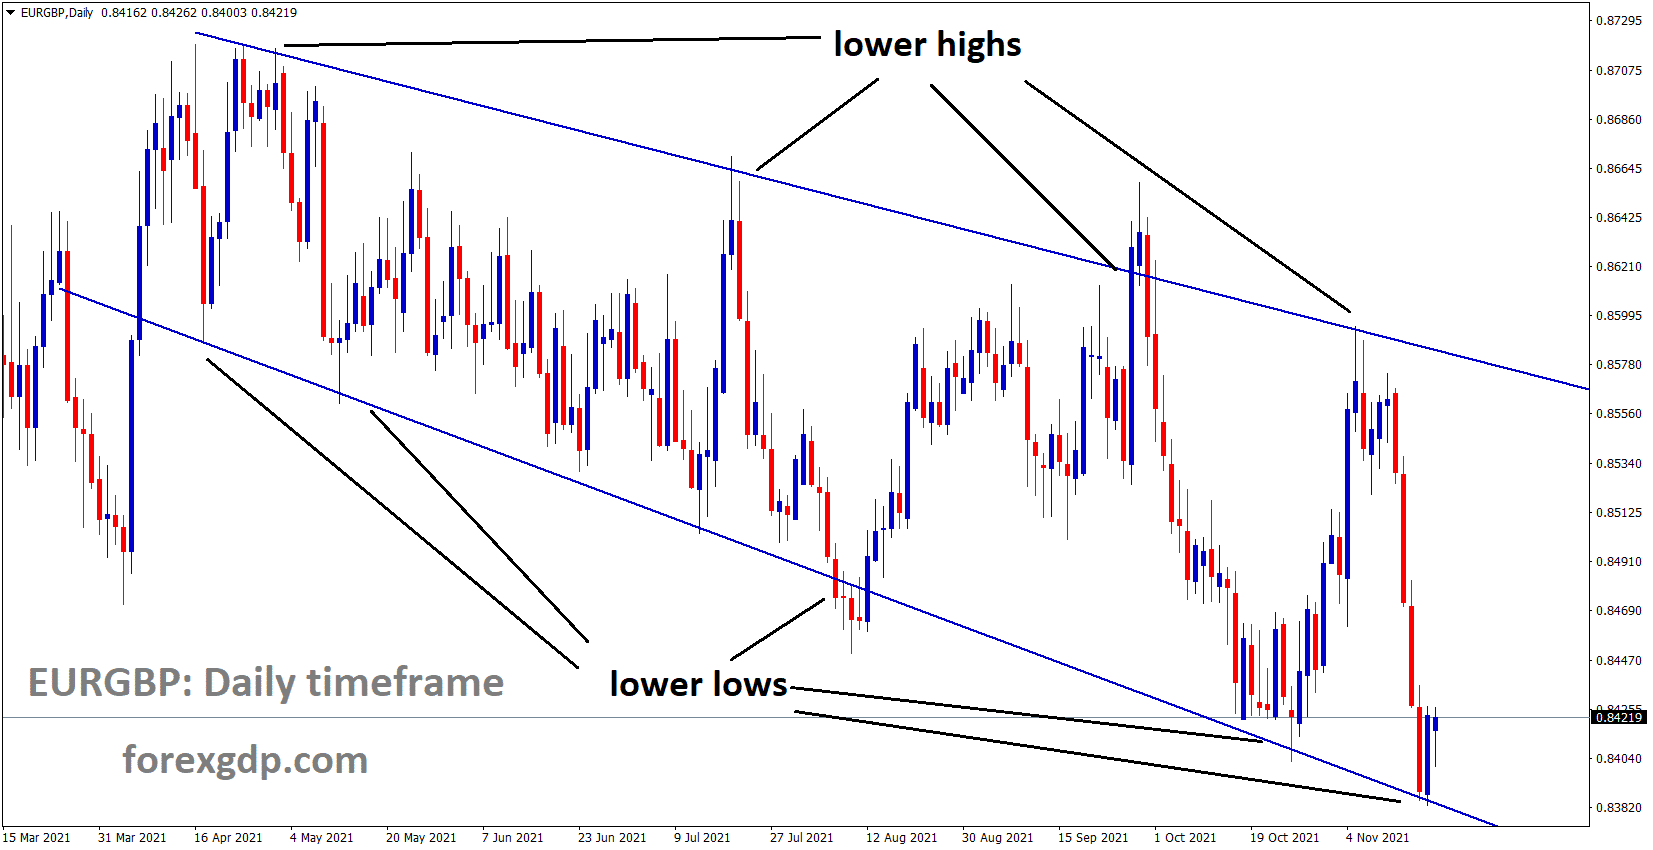 EURGBP is moving in the Descending channel and the market rebounded from a lower low area